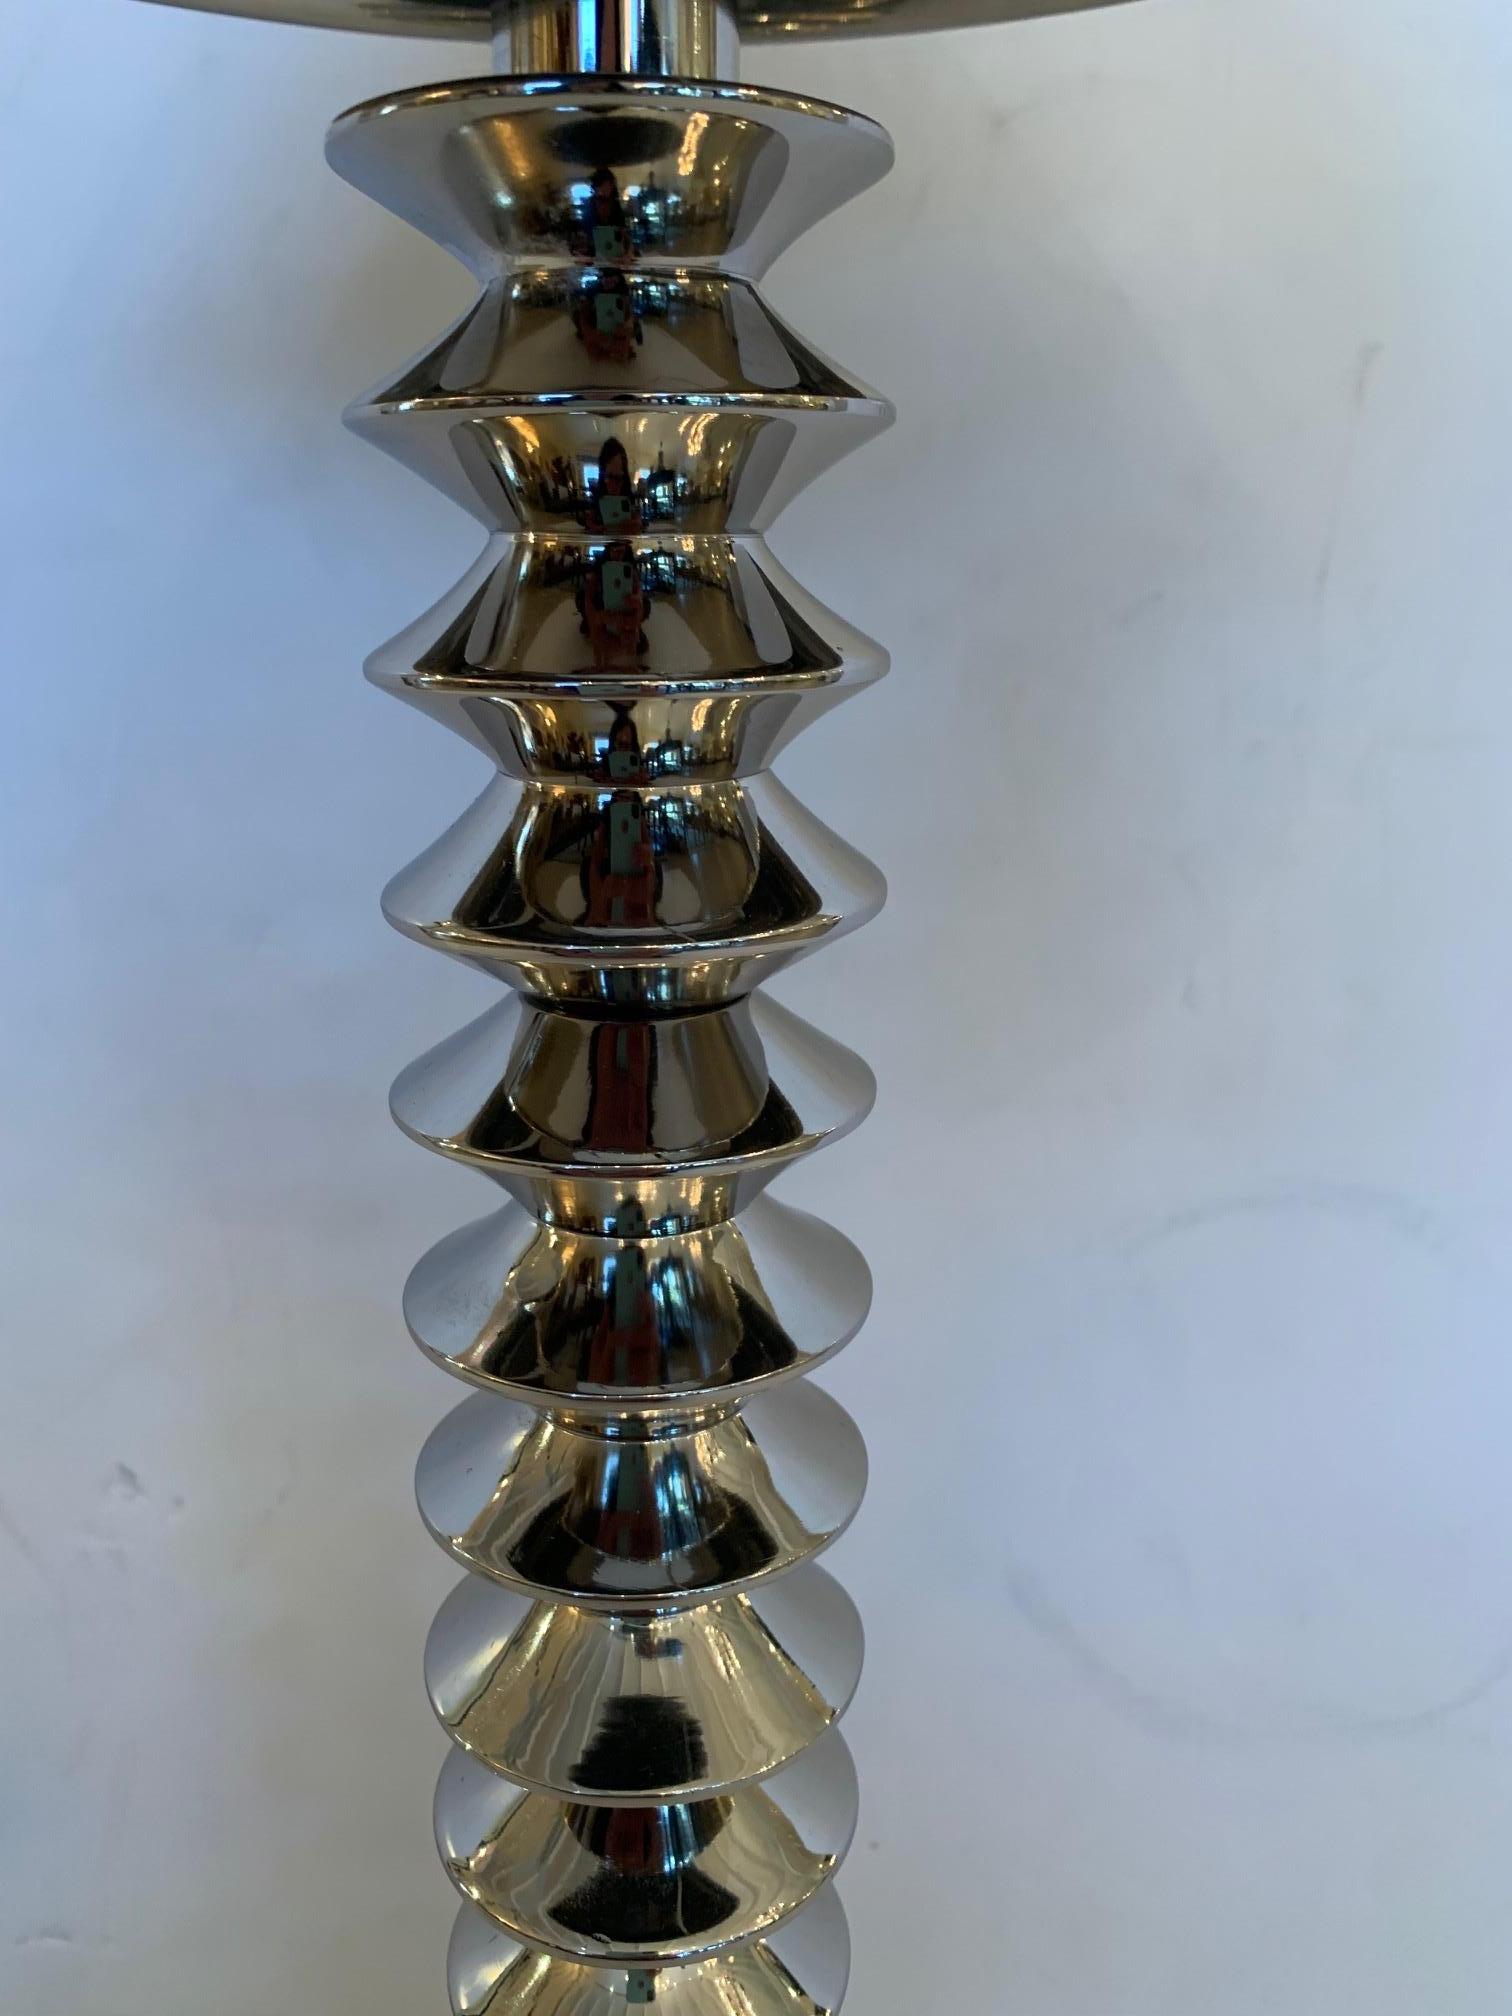 Shiny and stylish chrome table lamp having spiral candlestick column and glamorous silver metal shade.
Note: Pair available.